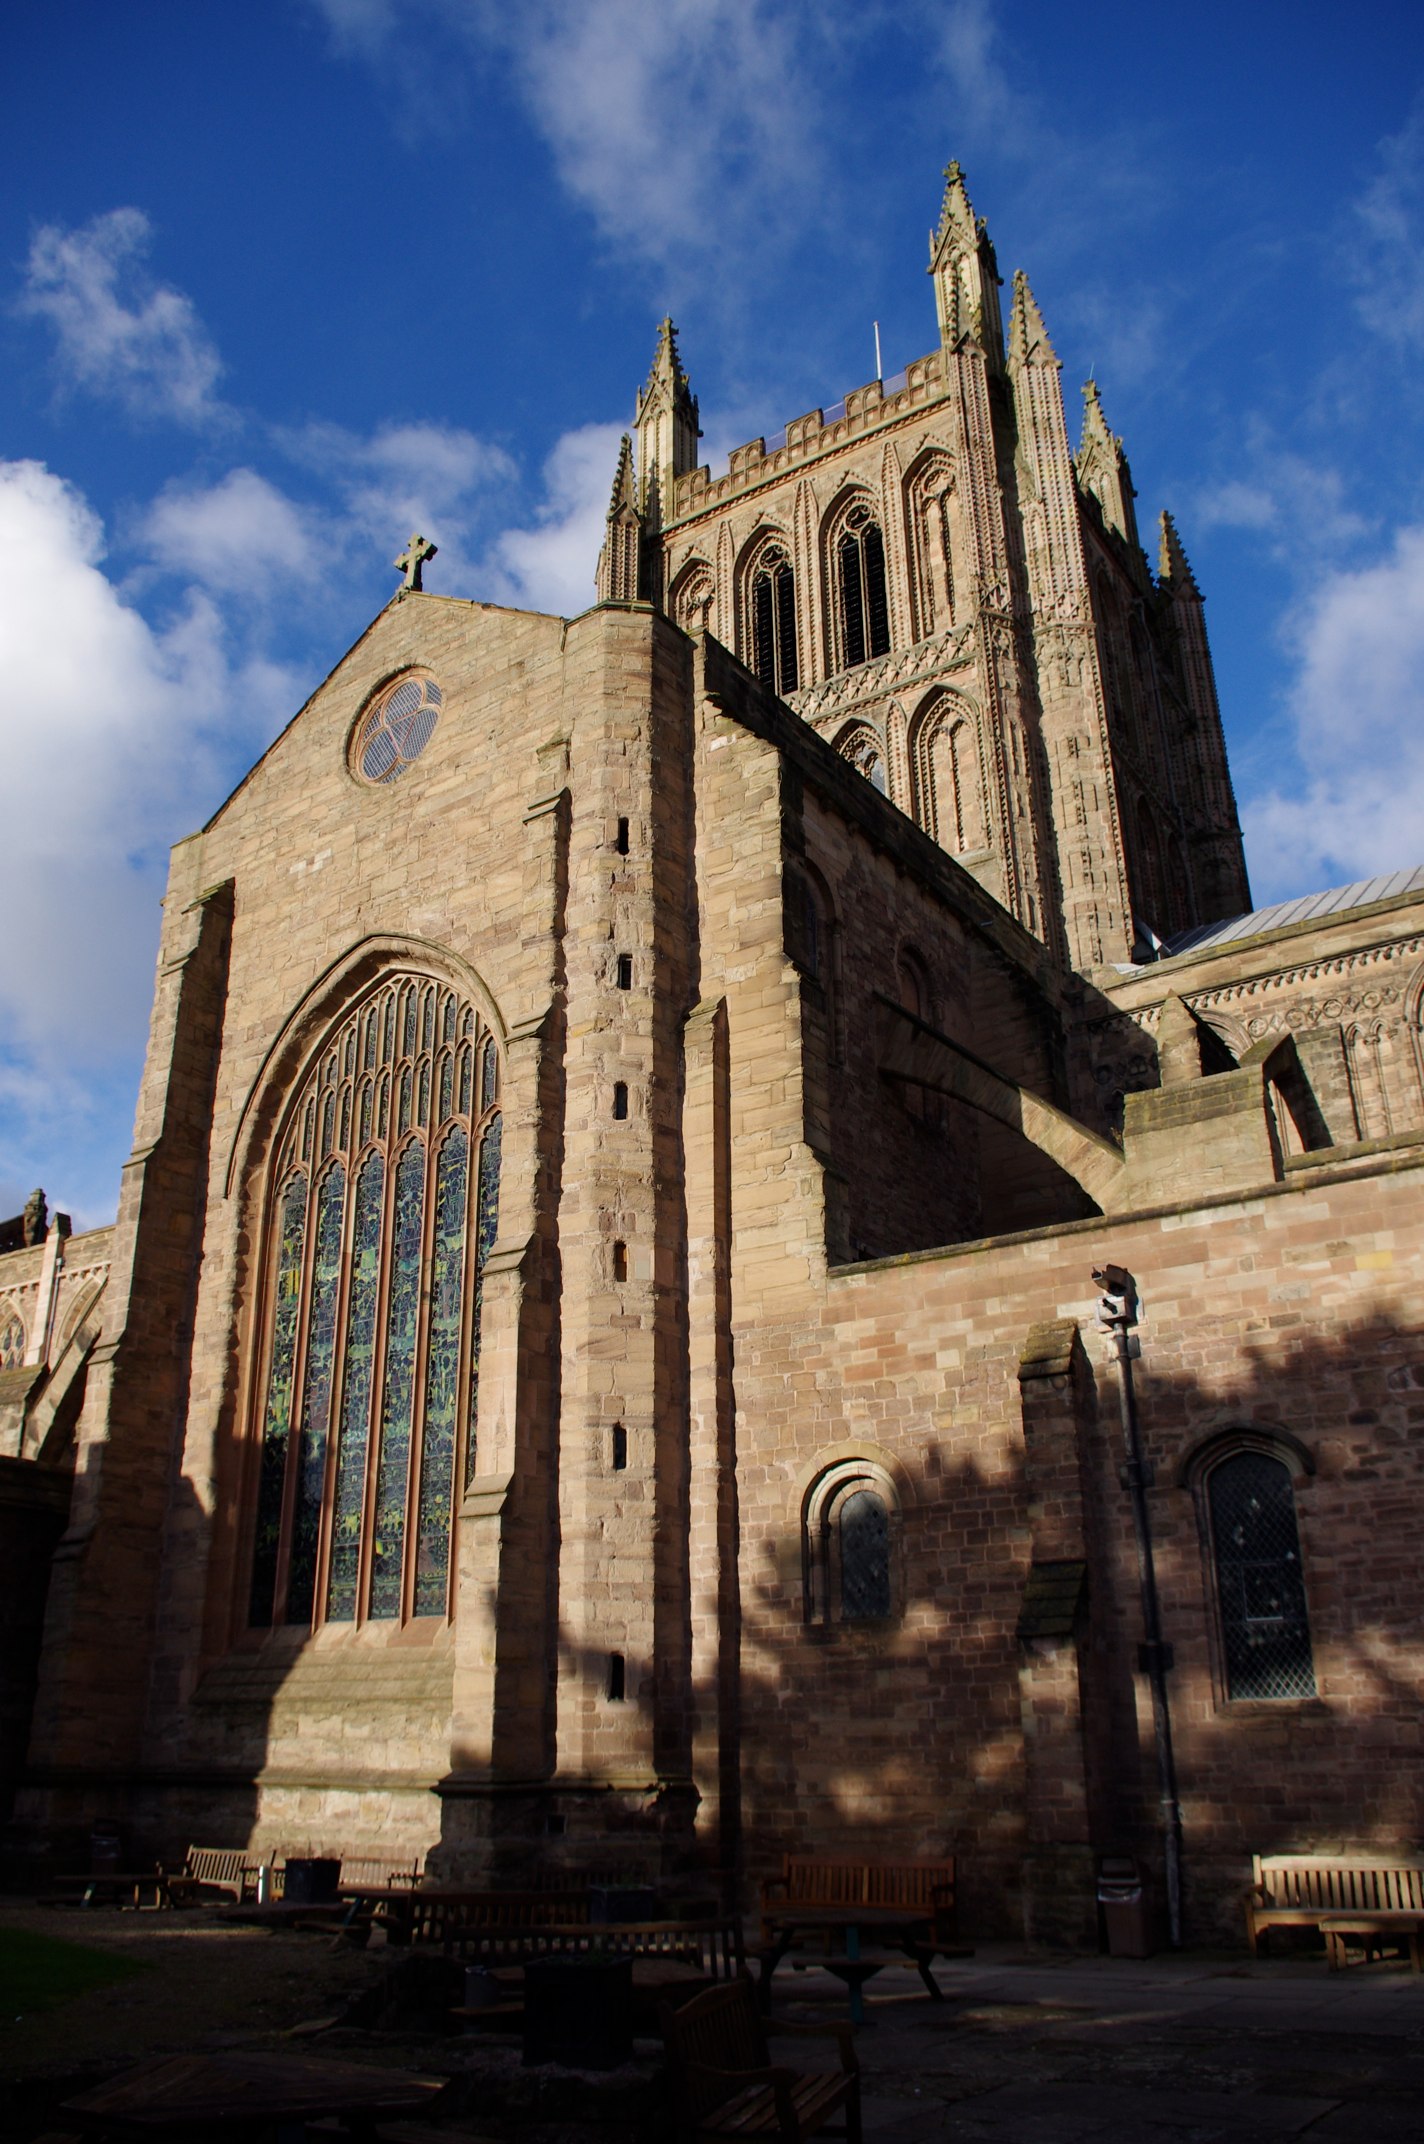 a tall stone cathedral with a steeple, stained glass windows, and clock